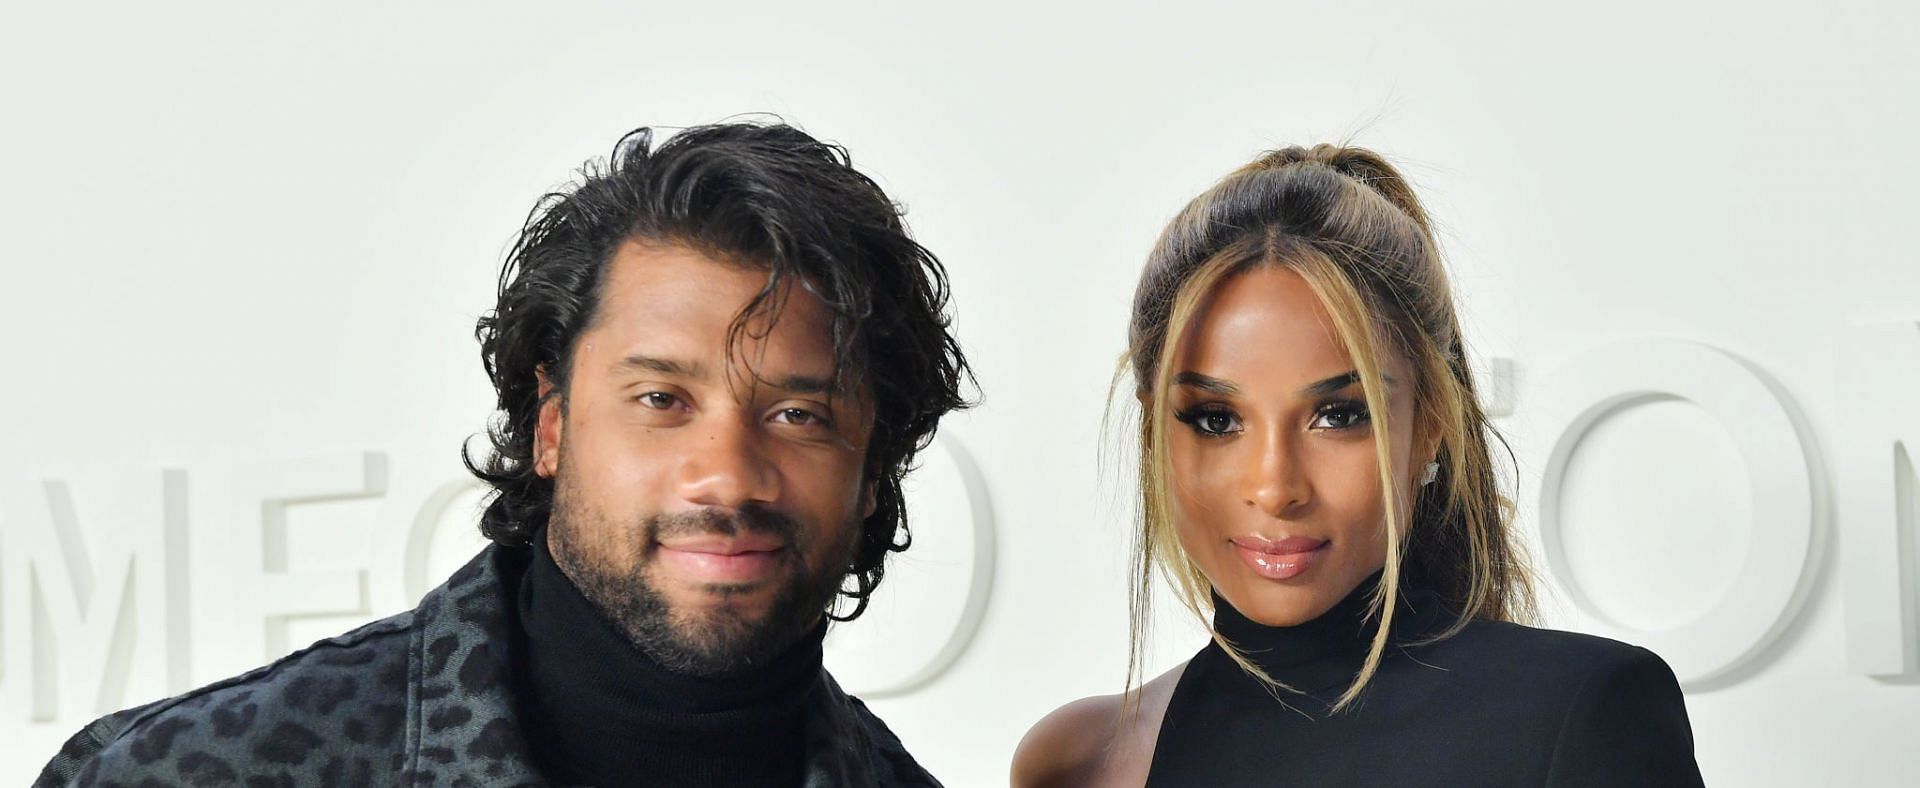 Russell Wilson and Ciara are proud parents to three children (Image via Stefanie Keenan/Getty Images